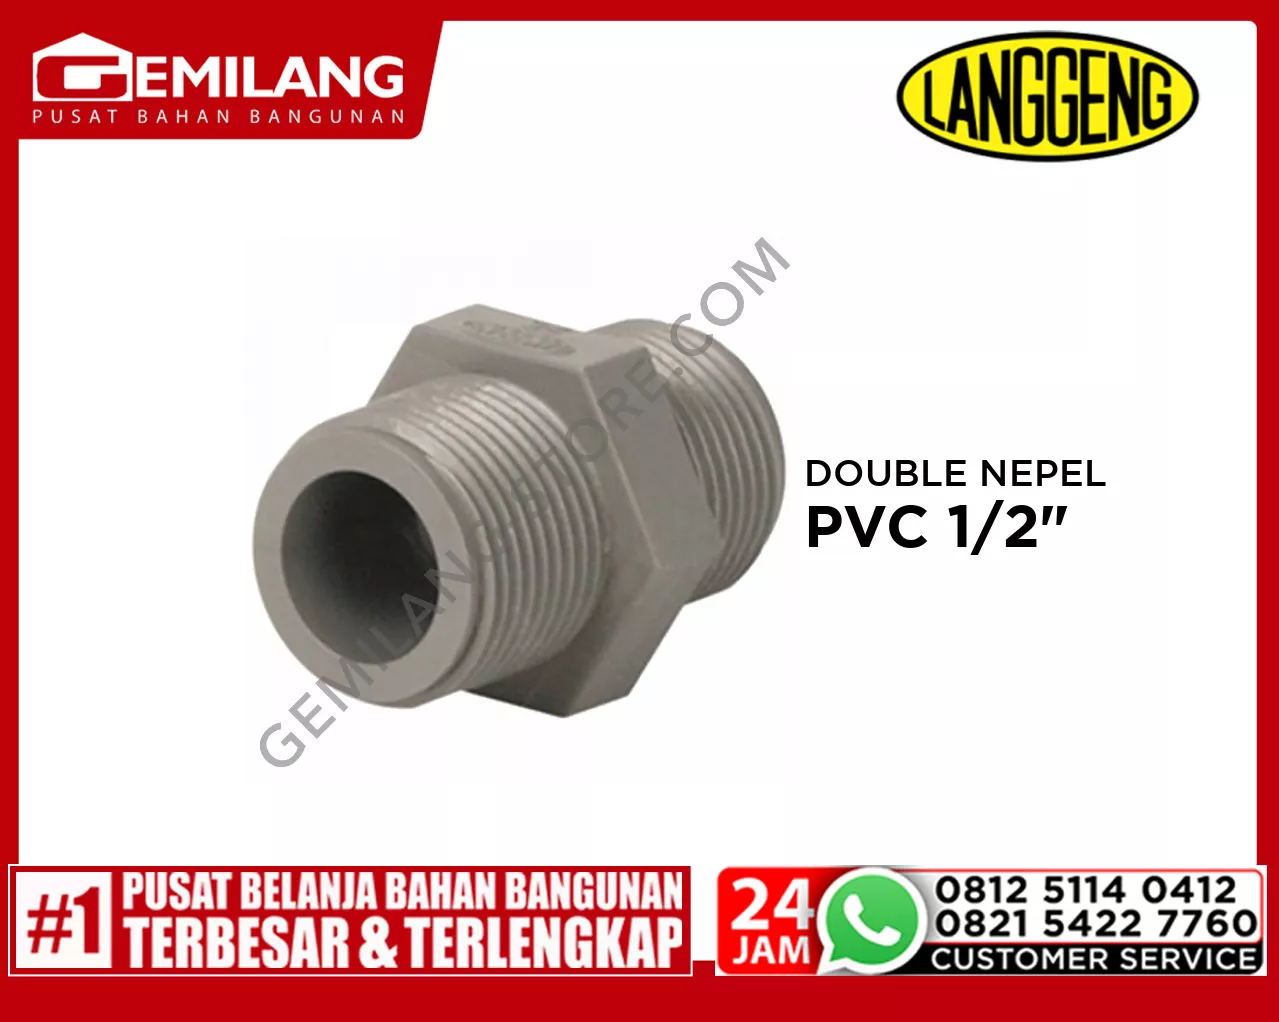 LANGGENG DOUBLE NEPEL PVC 1/2inch